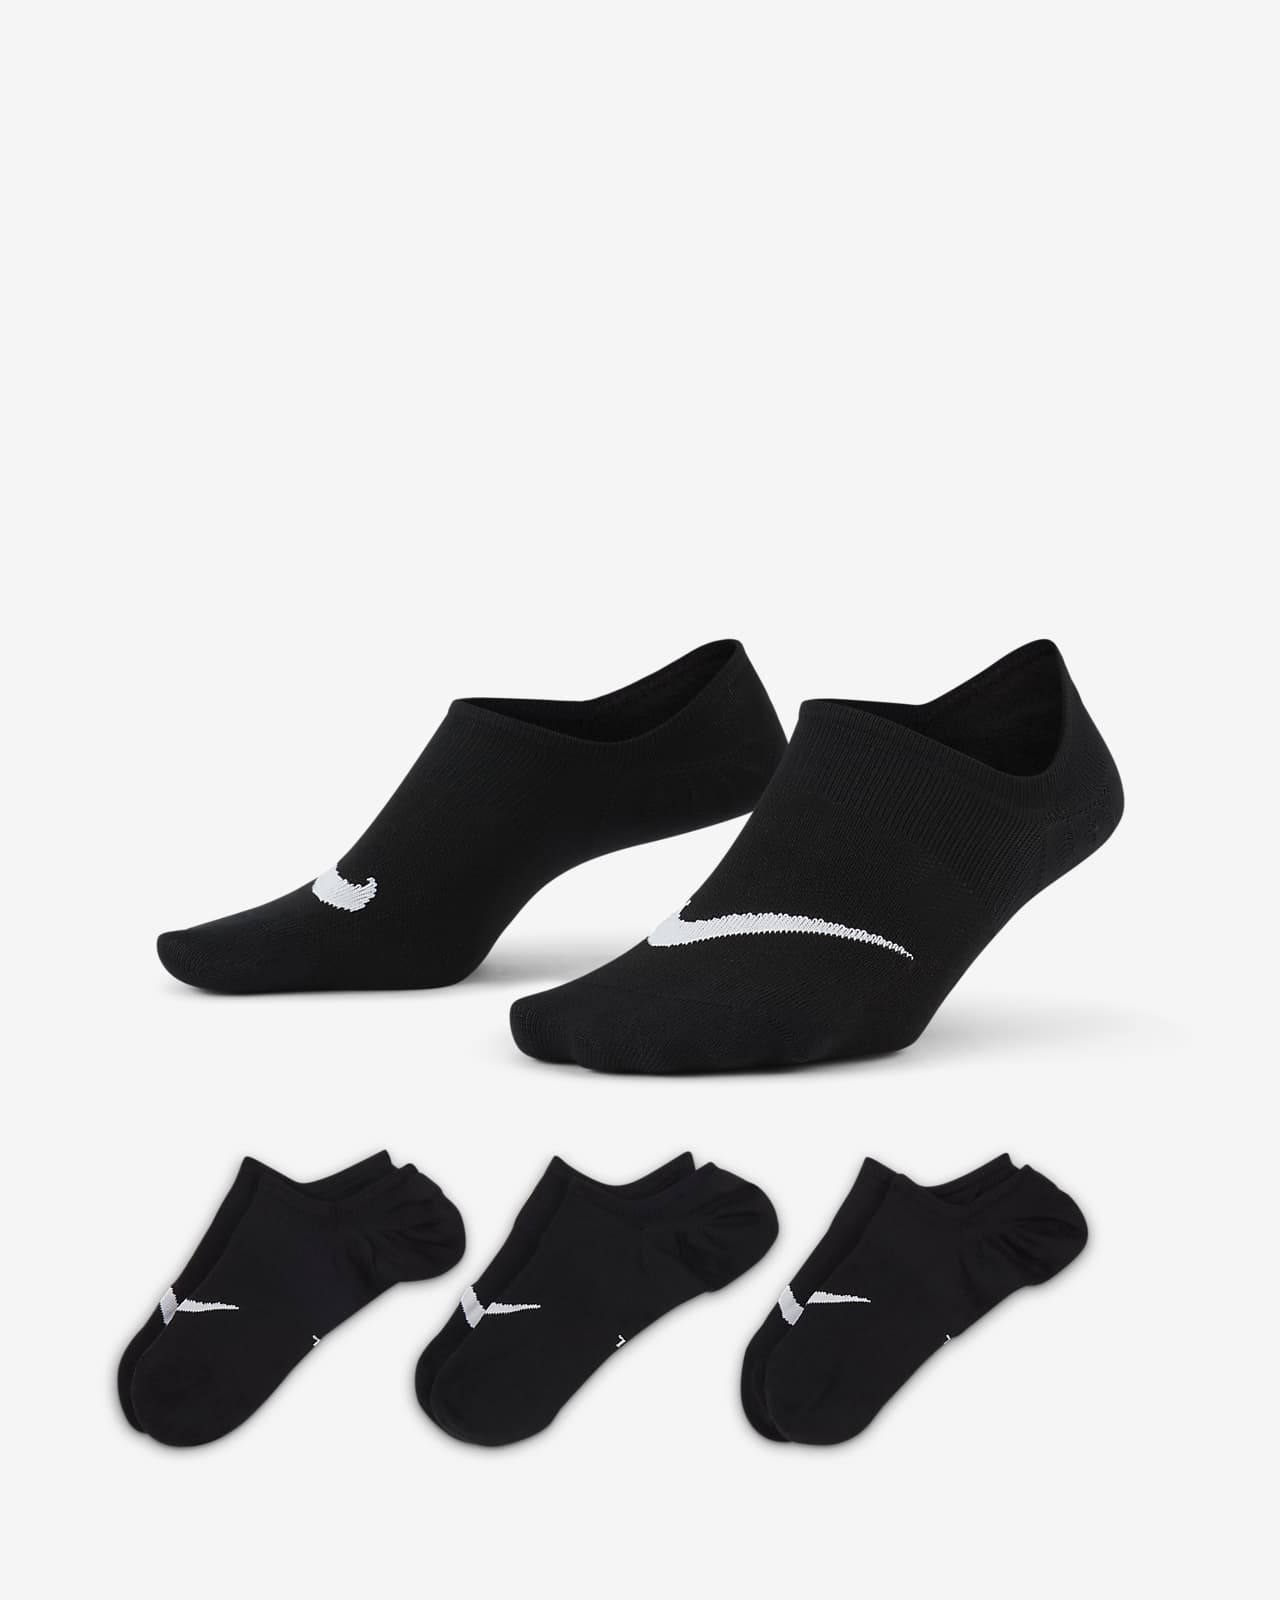 Calcetines invisibles de entrenamiento para mujer Nike Everyday Plus  Lightweight (3 pares). Nike MX